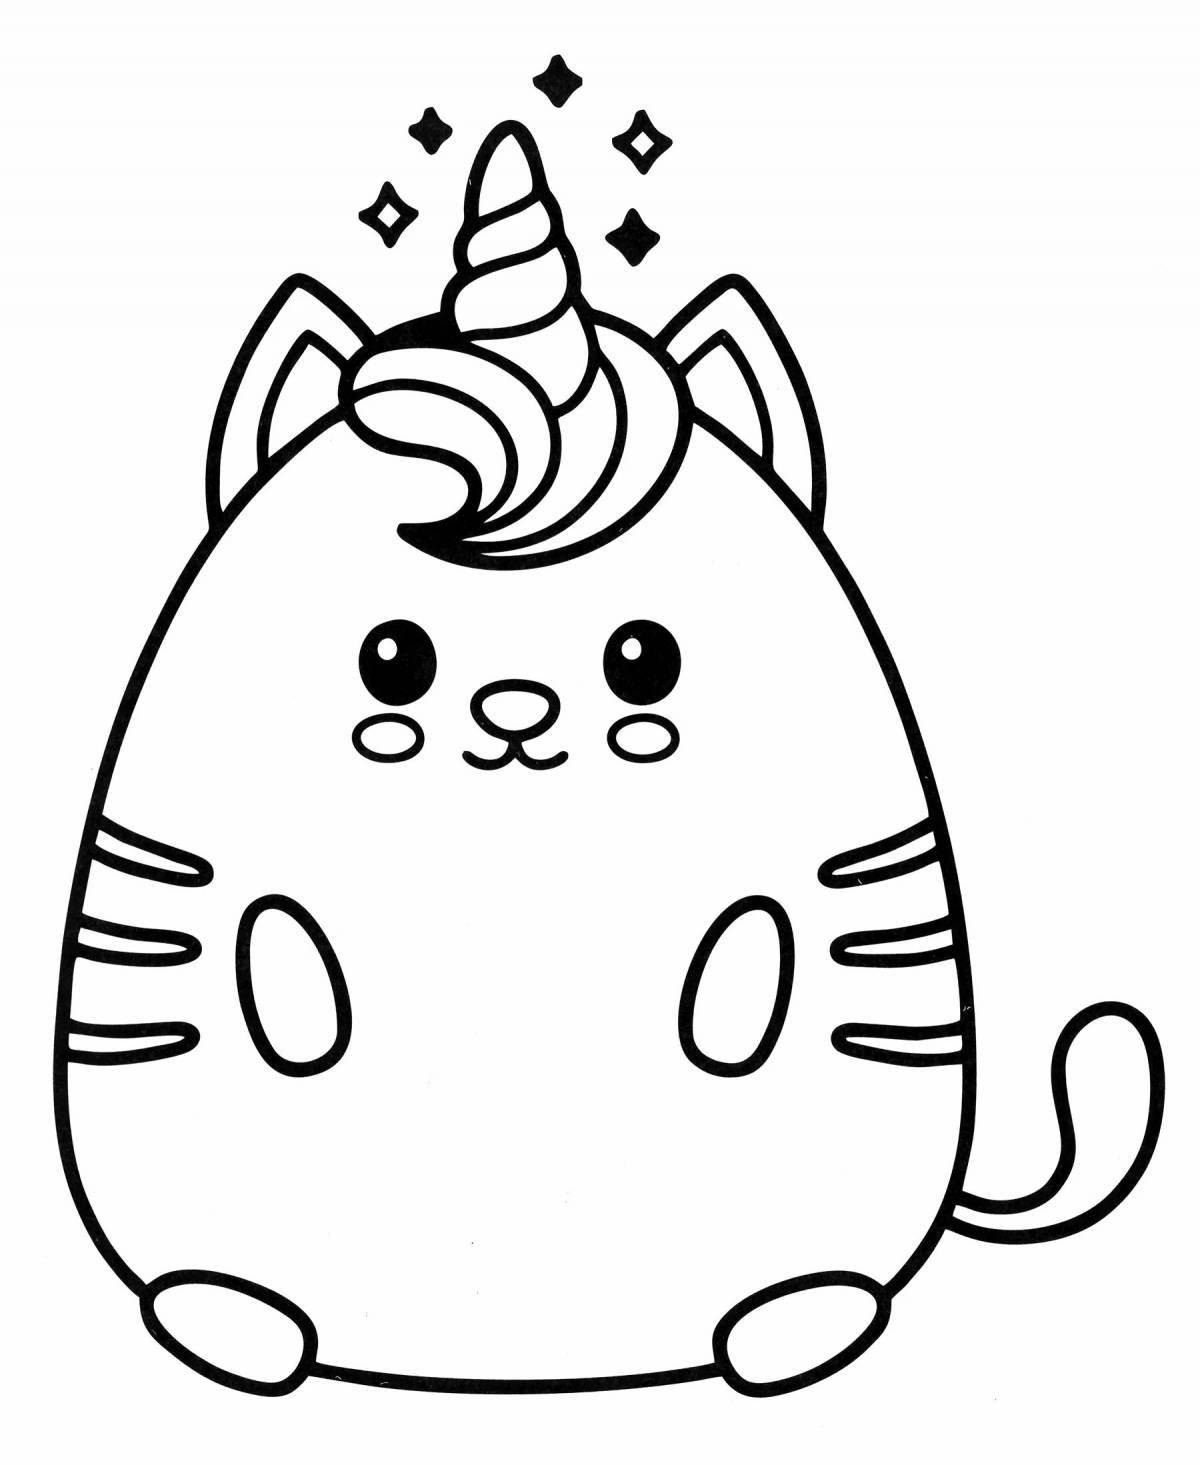 Mystical unicorn cat coloring book for girls